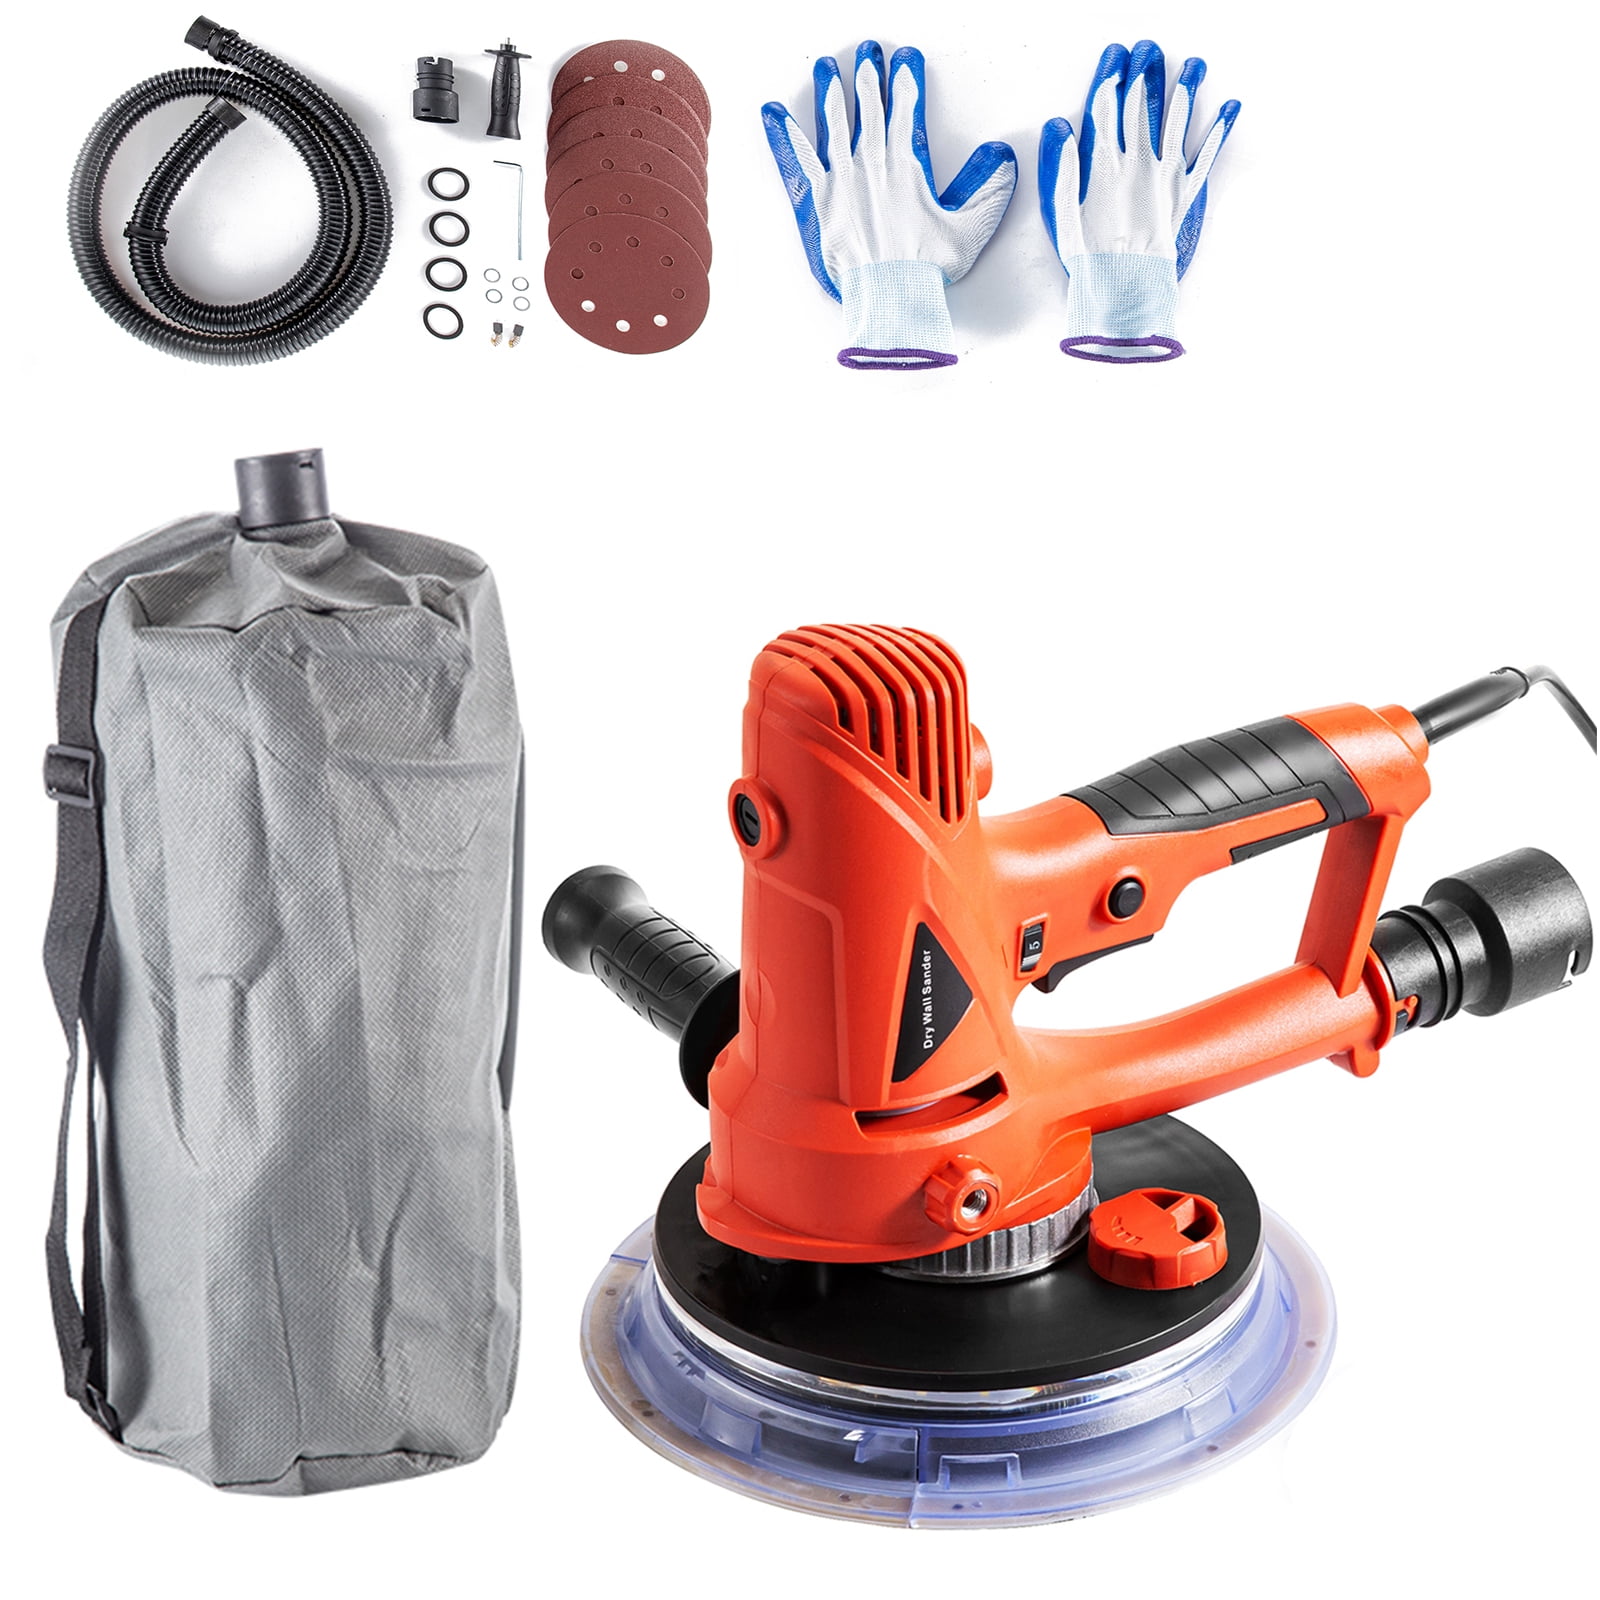 Details about   Electric Drywall Sander Machine Vacuum System Sanding Pad Carrying Bag Led Light 